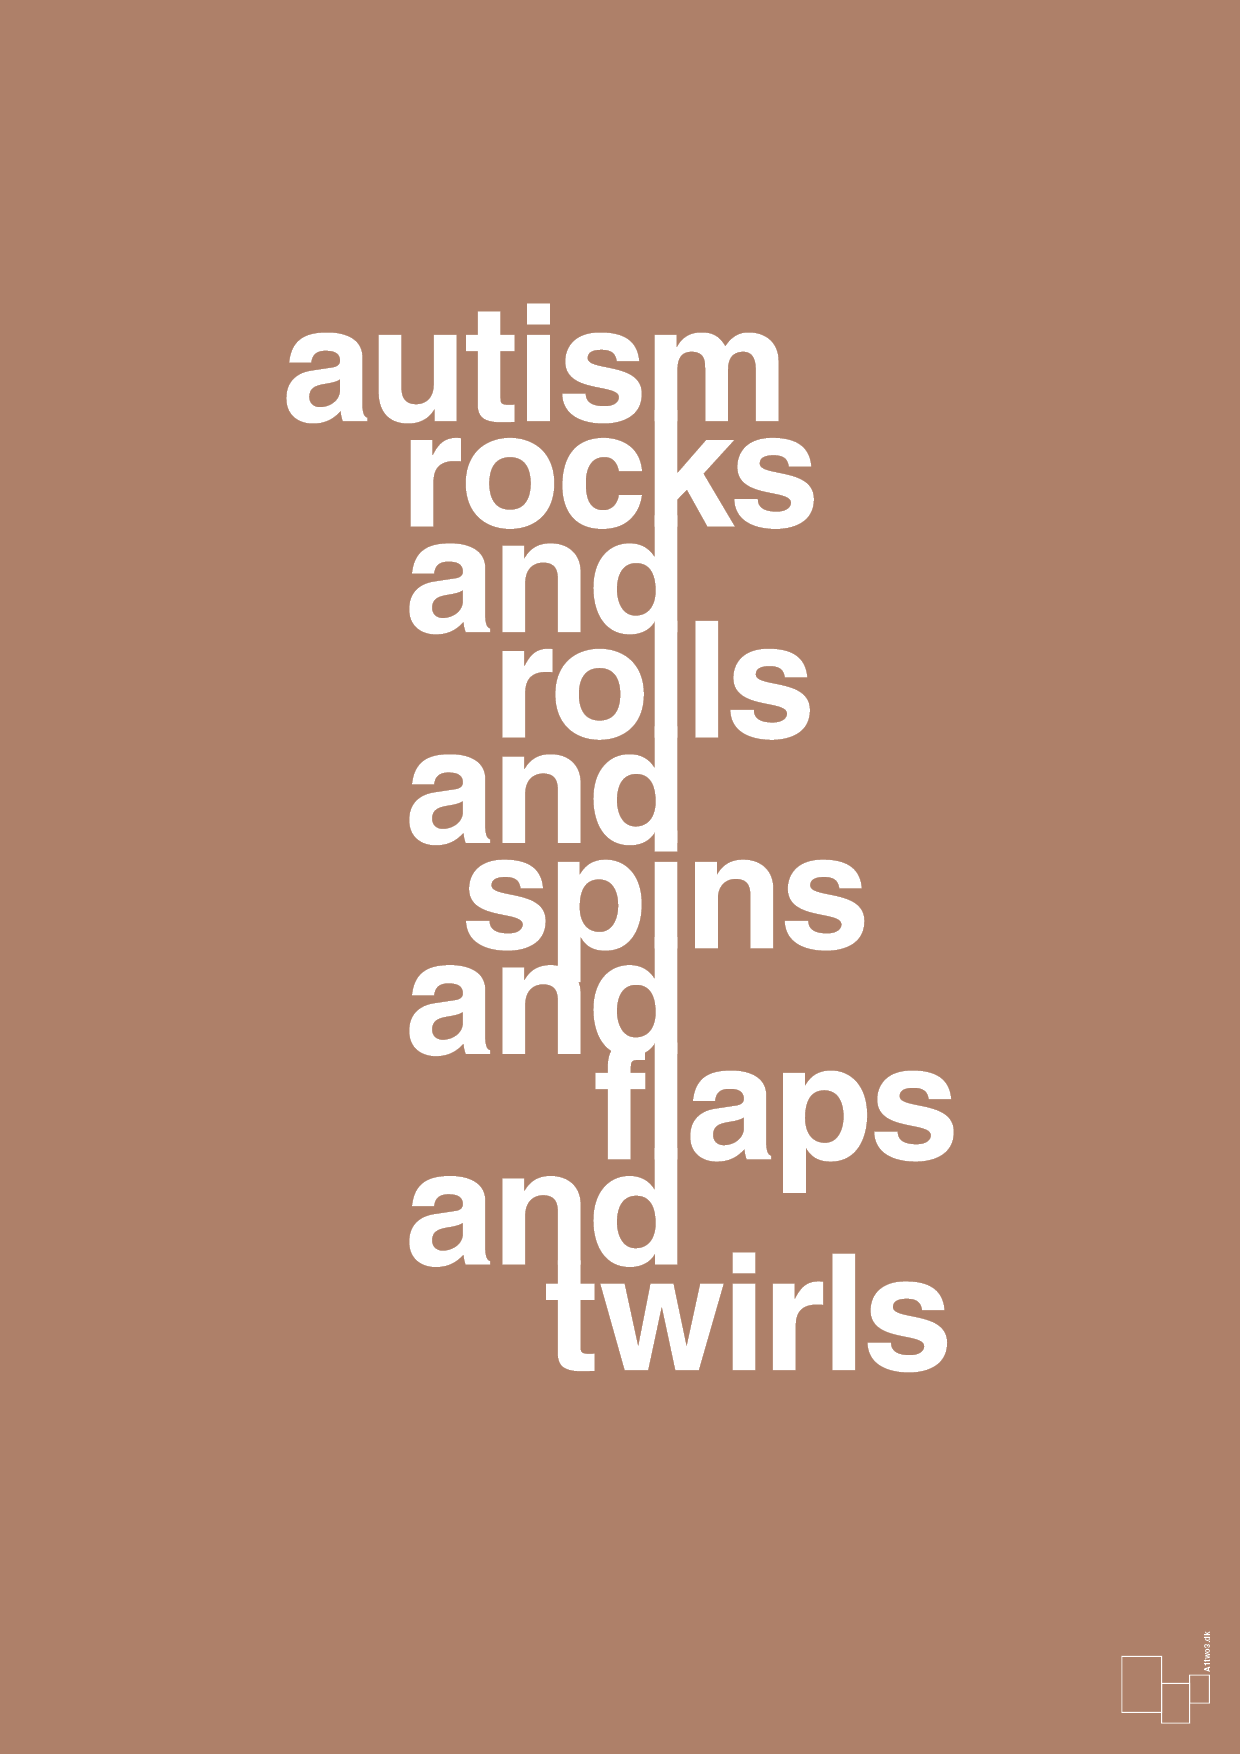 autism rocks and rolls and spins and flaps and twirls - Plakat med Samfund i Cider Spice